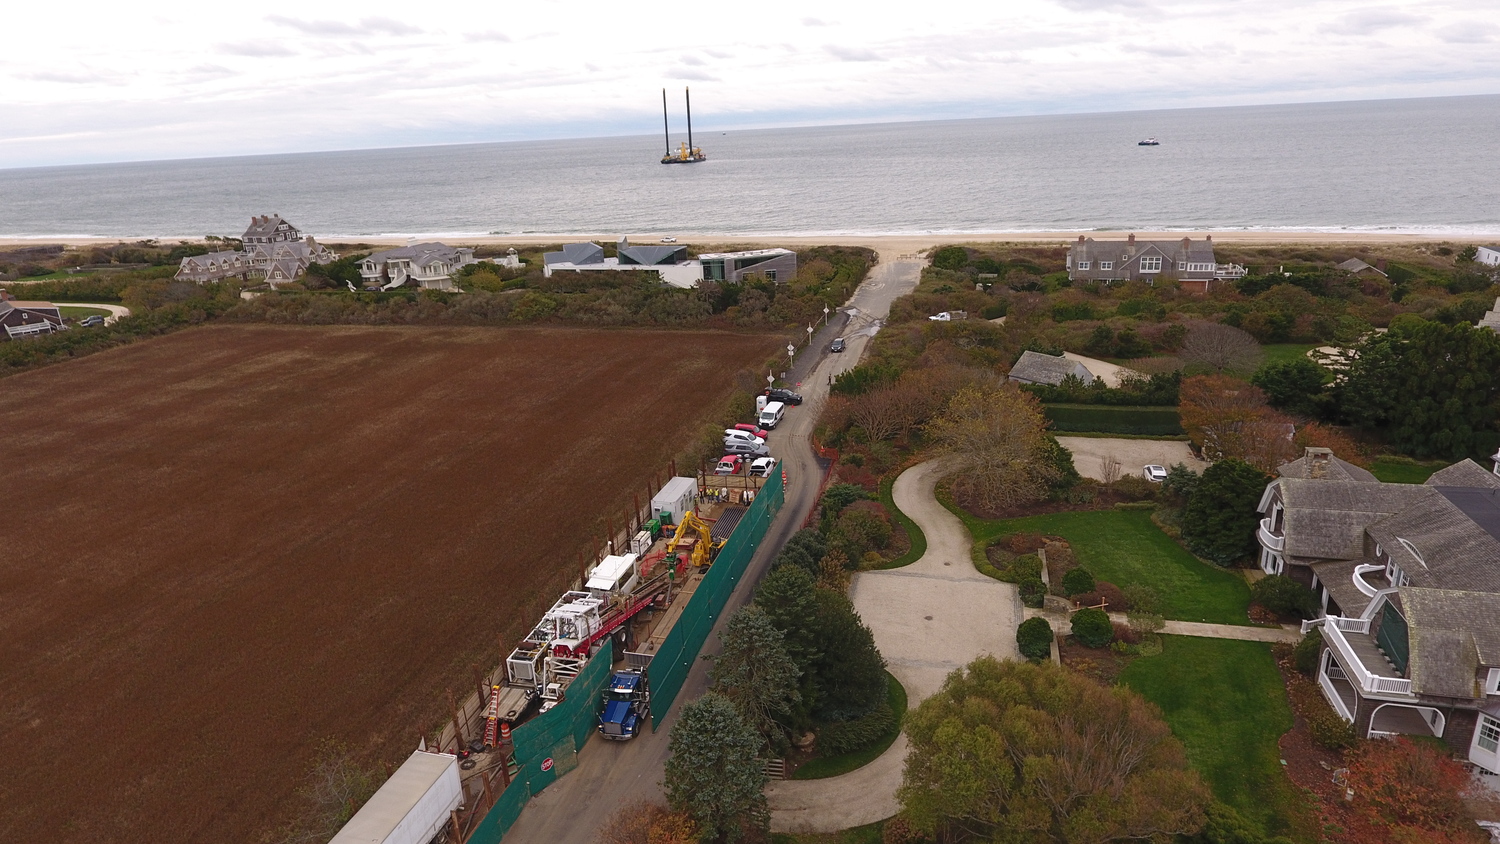 Over the winter drilling crews working for South Fork Wind connected a cable running beneath Wainscott roads to a cable that will ultimately connect to the 12 wind turbines that will be constructed this summer more than 60 miles to the east, southeast of Block Island.
MICHAEL WRIGHT